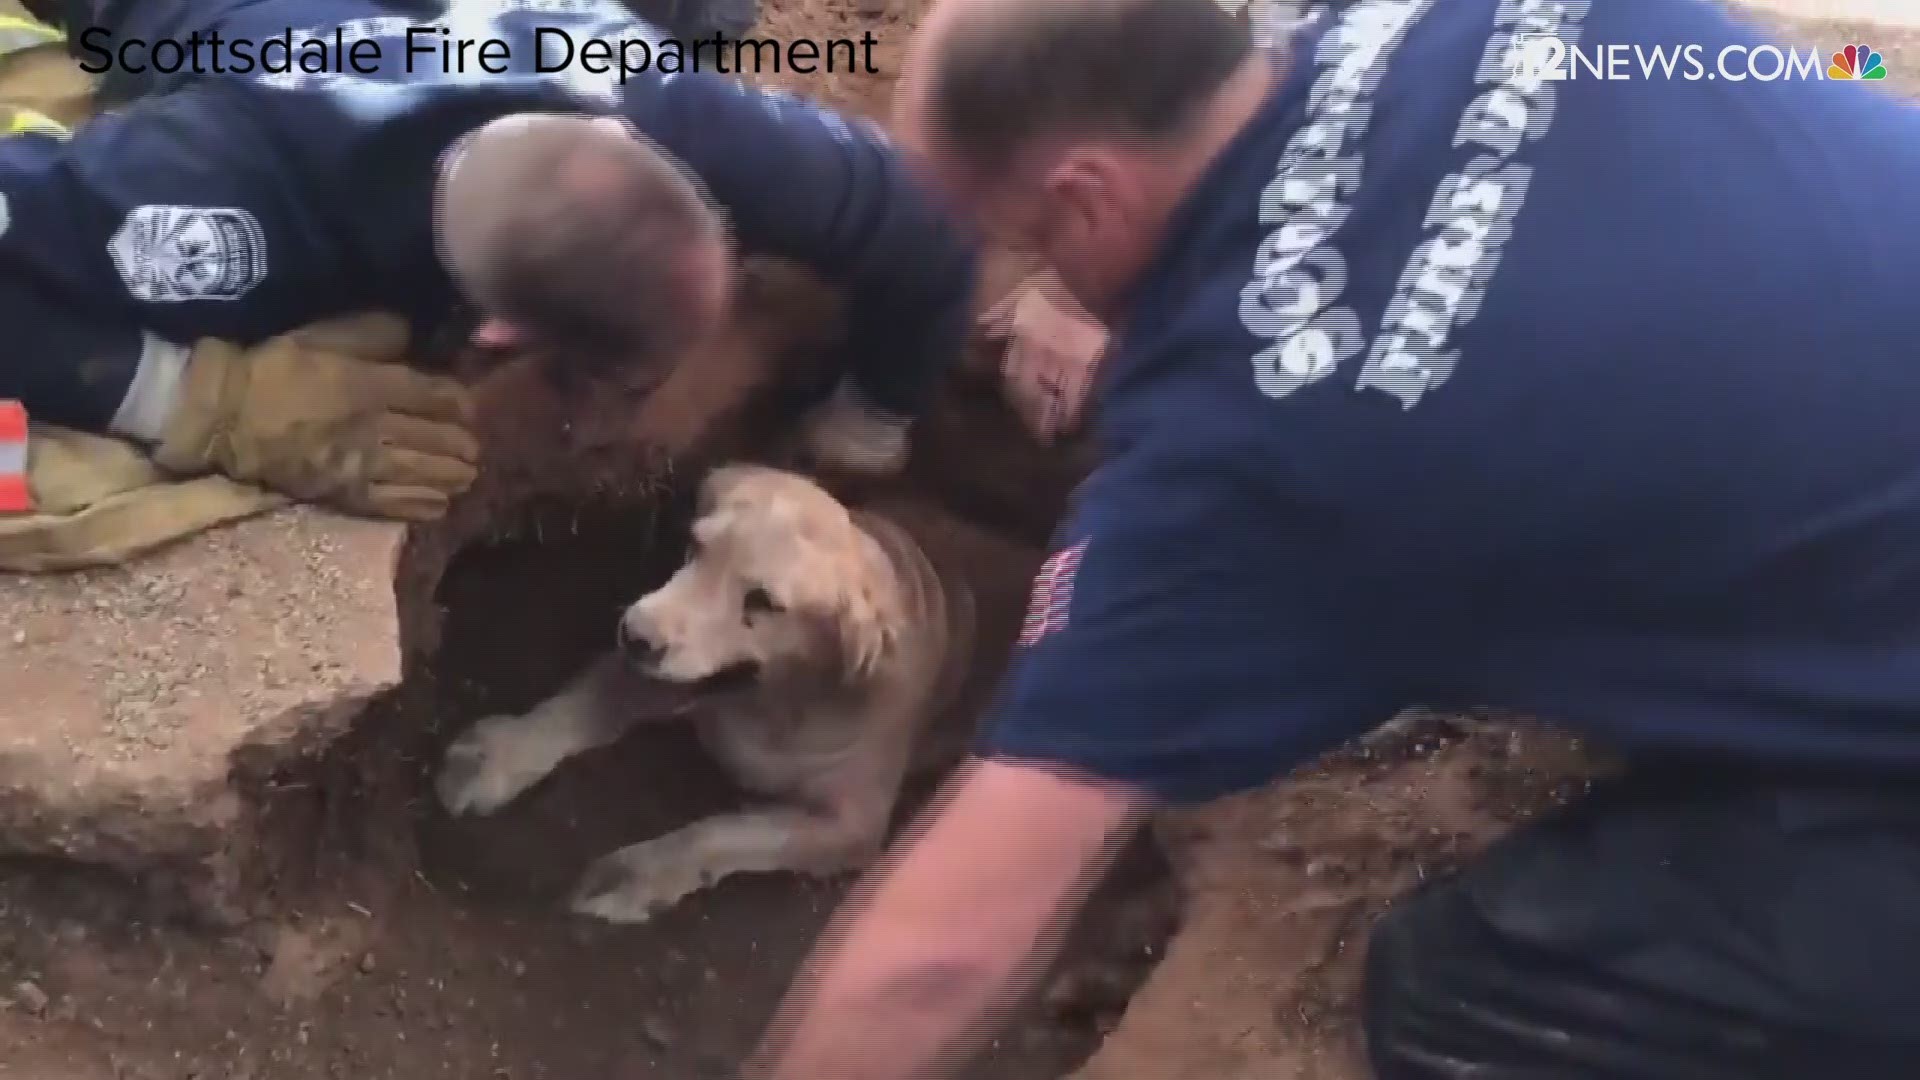 A crew from Scottsdale Fire station 15 rushed to the scene and managed to rescue Quinn after 20 minutes of digging.